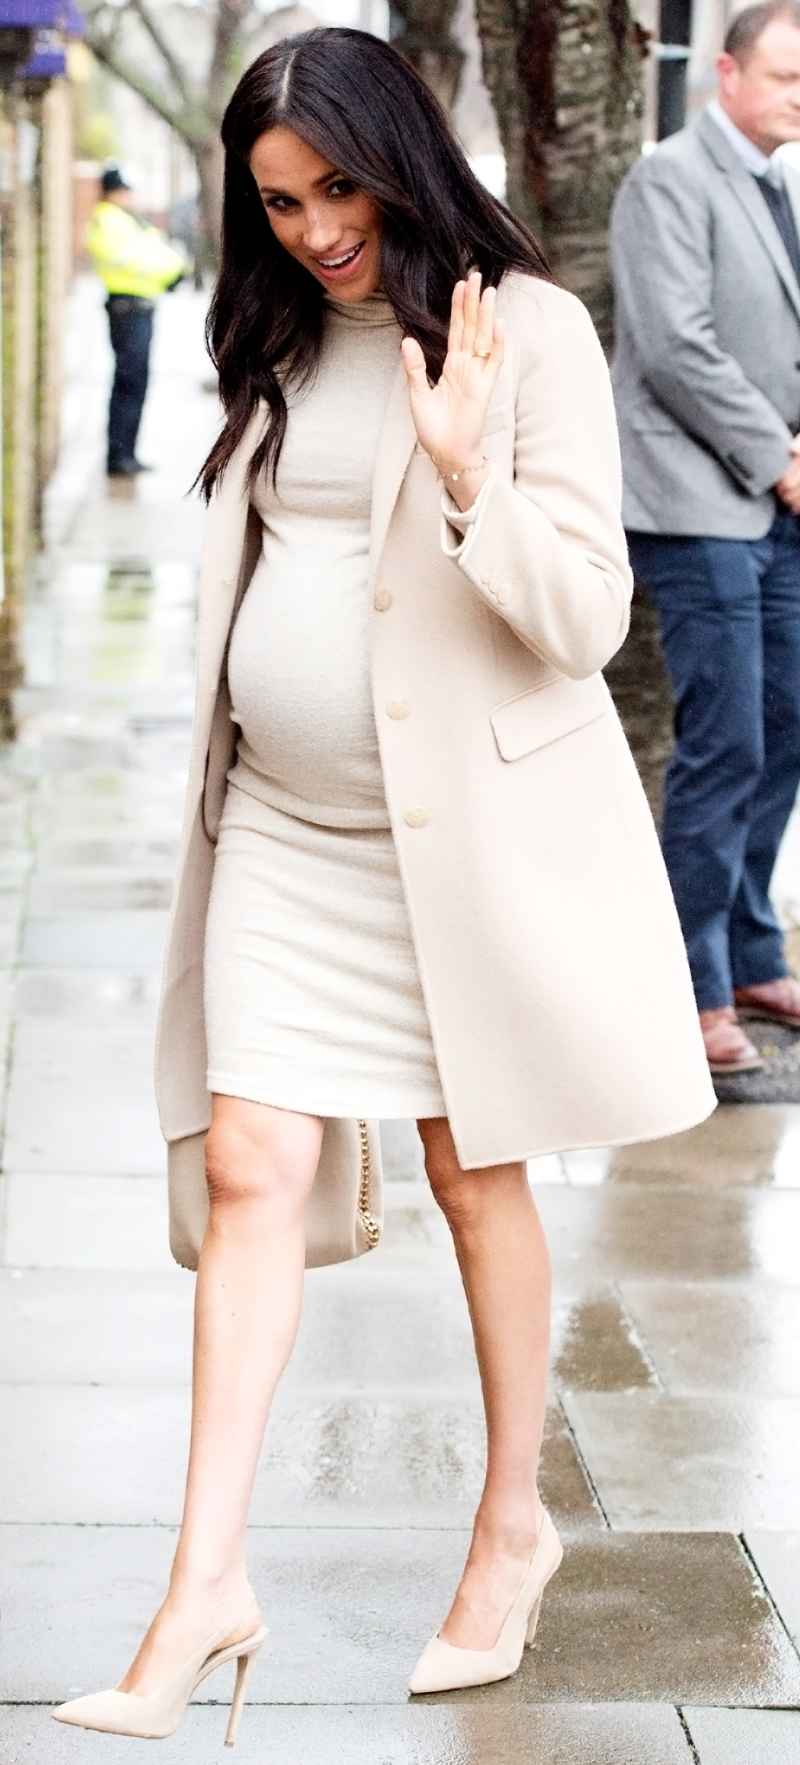 Every Royal Rule Duchess Meghan and Prince Harry Have Broken During Her Pregnancy